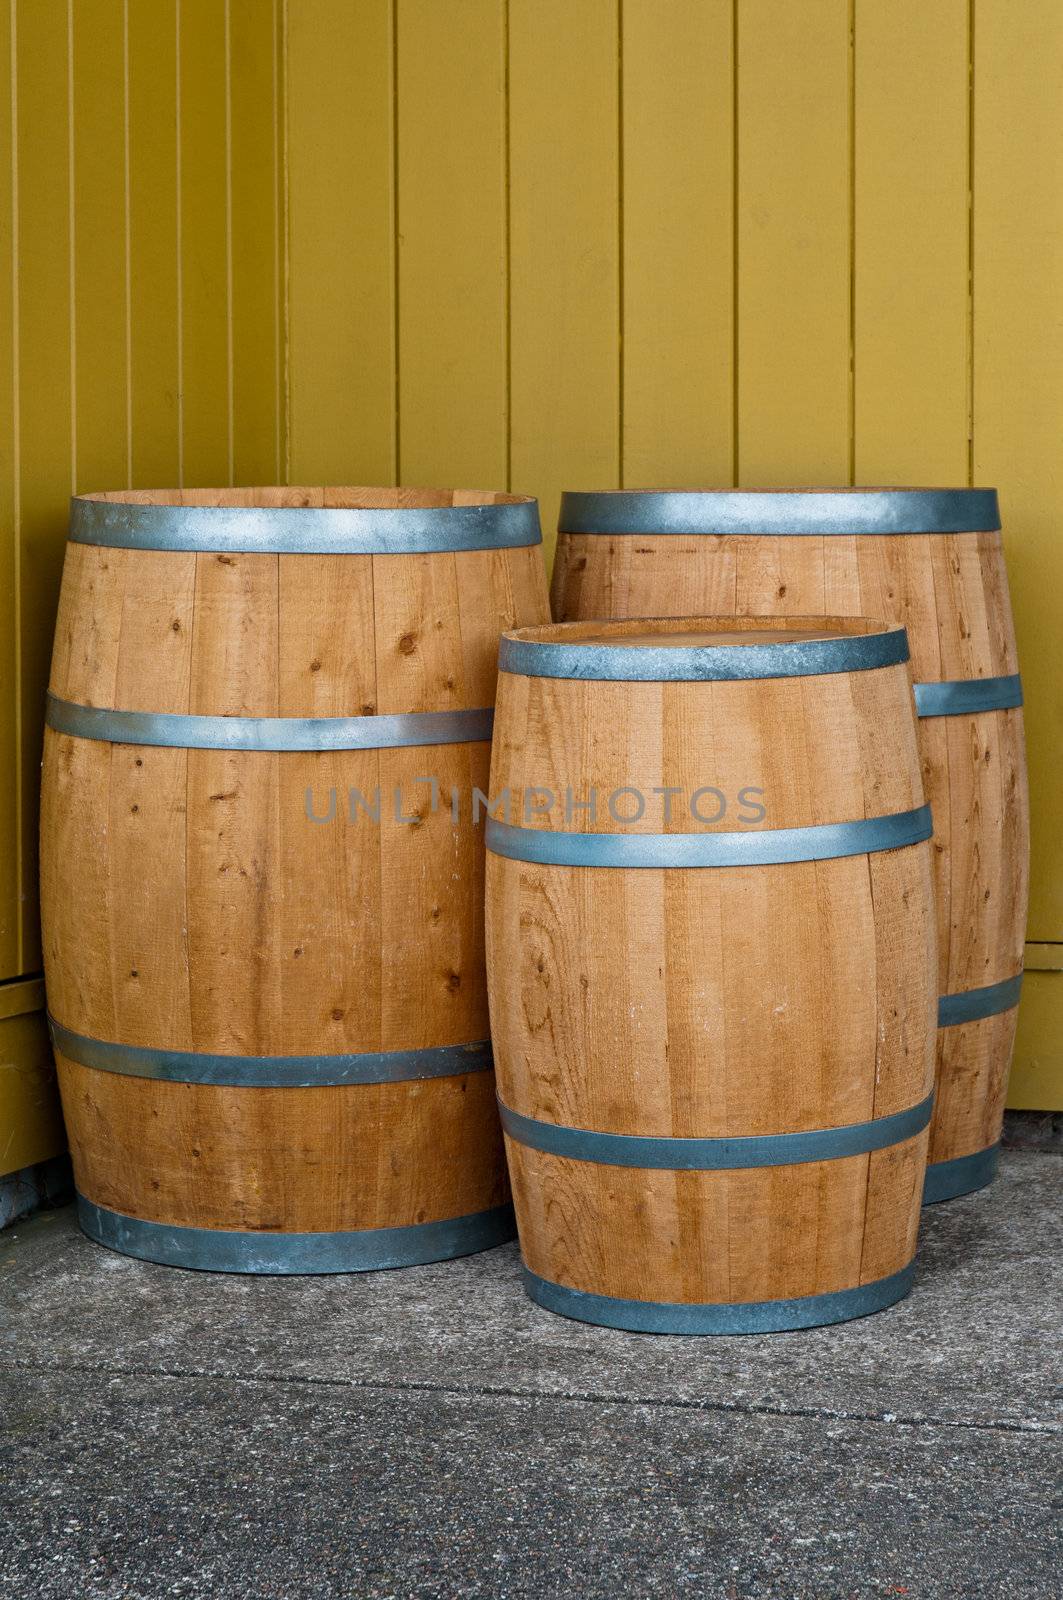 Three wooden barrels in front of a wooden wall